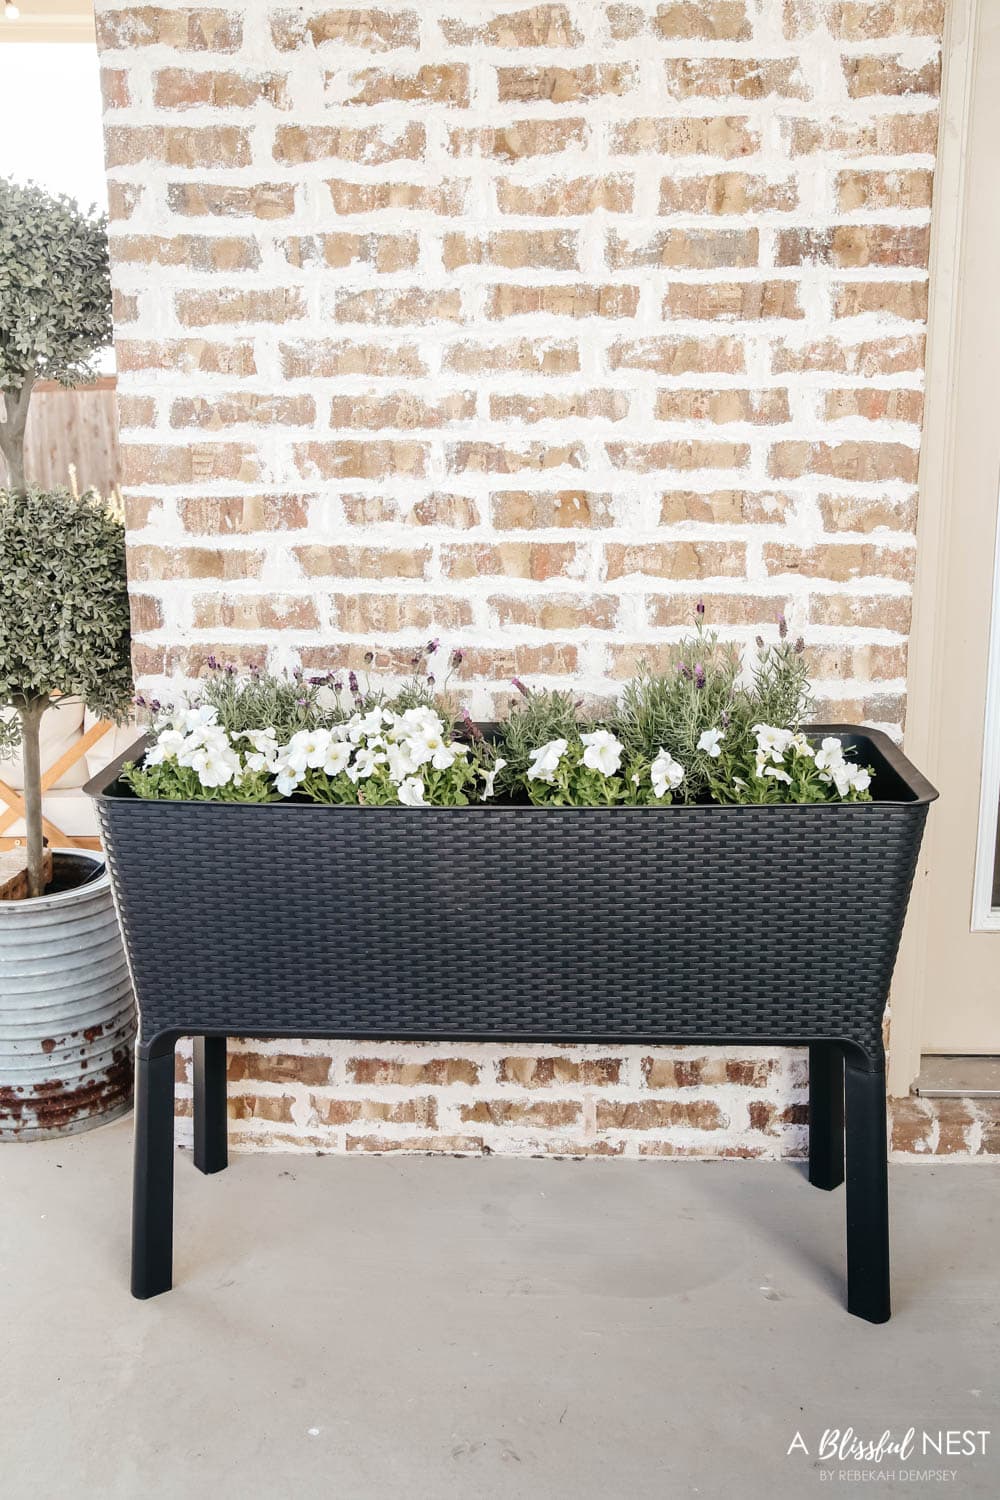 Raised planter with plants in front of a brick wall on a patio